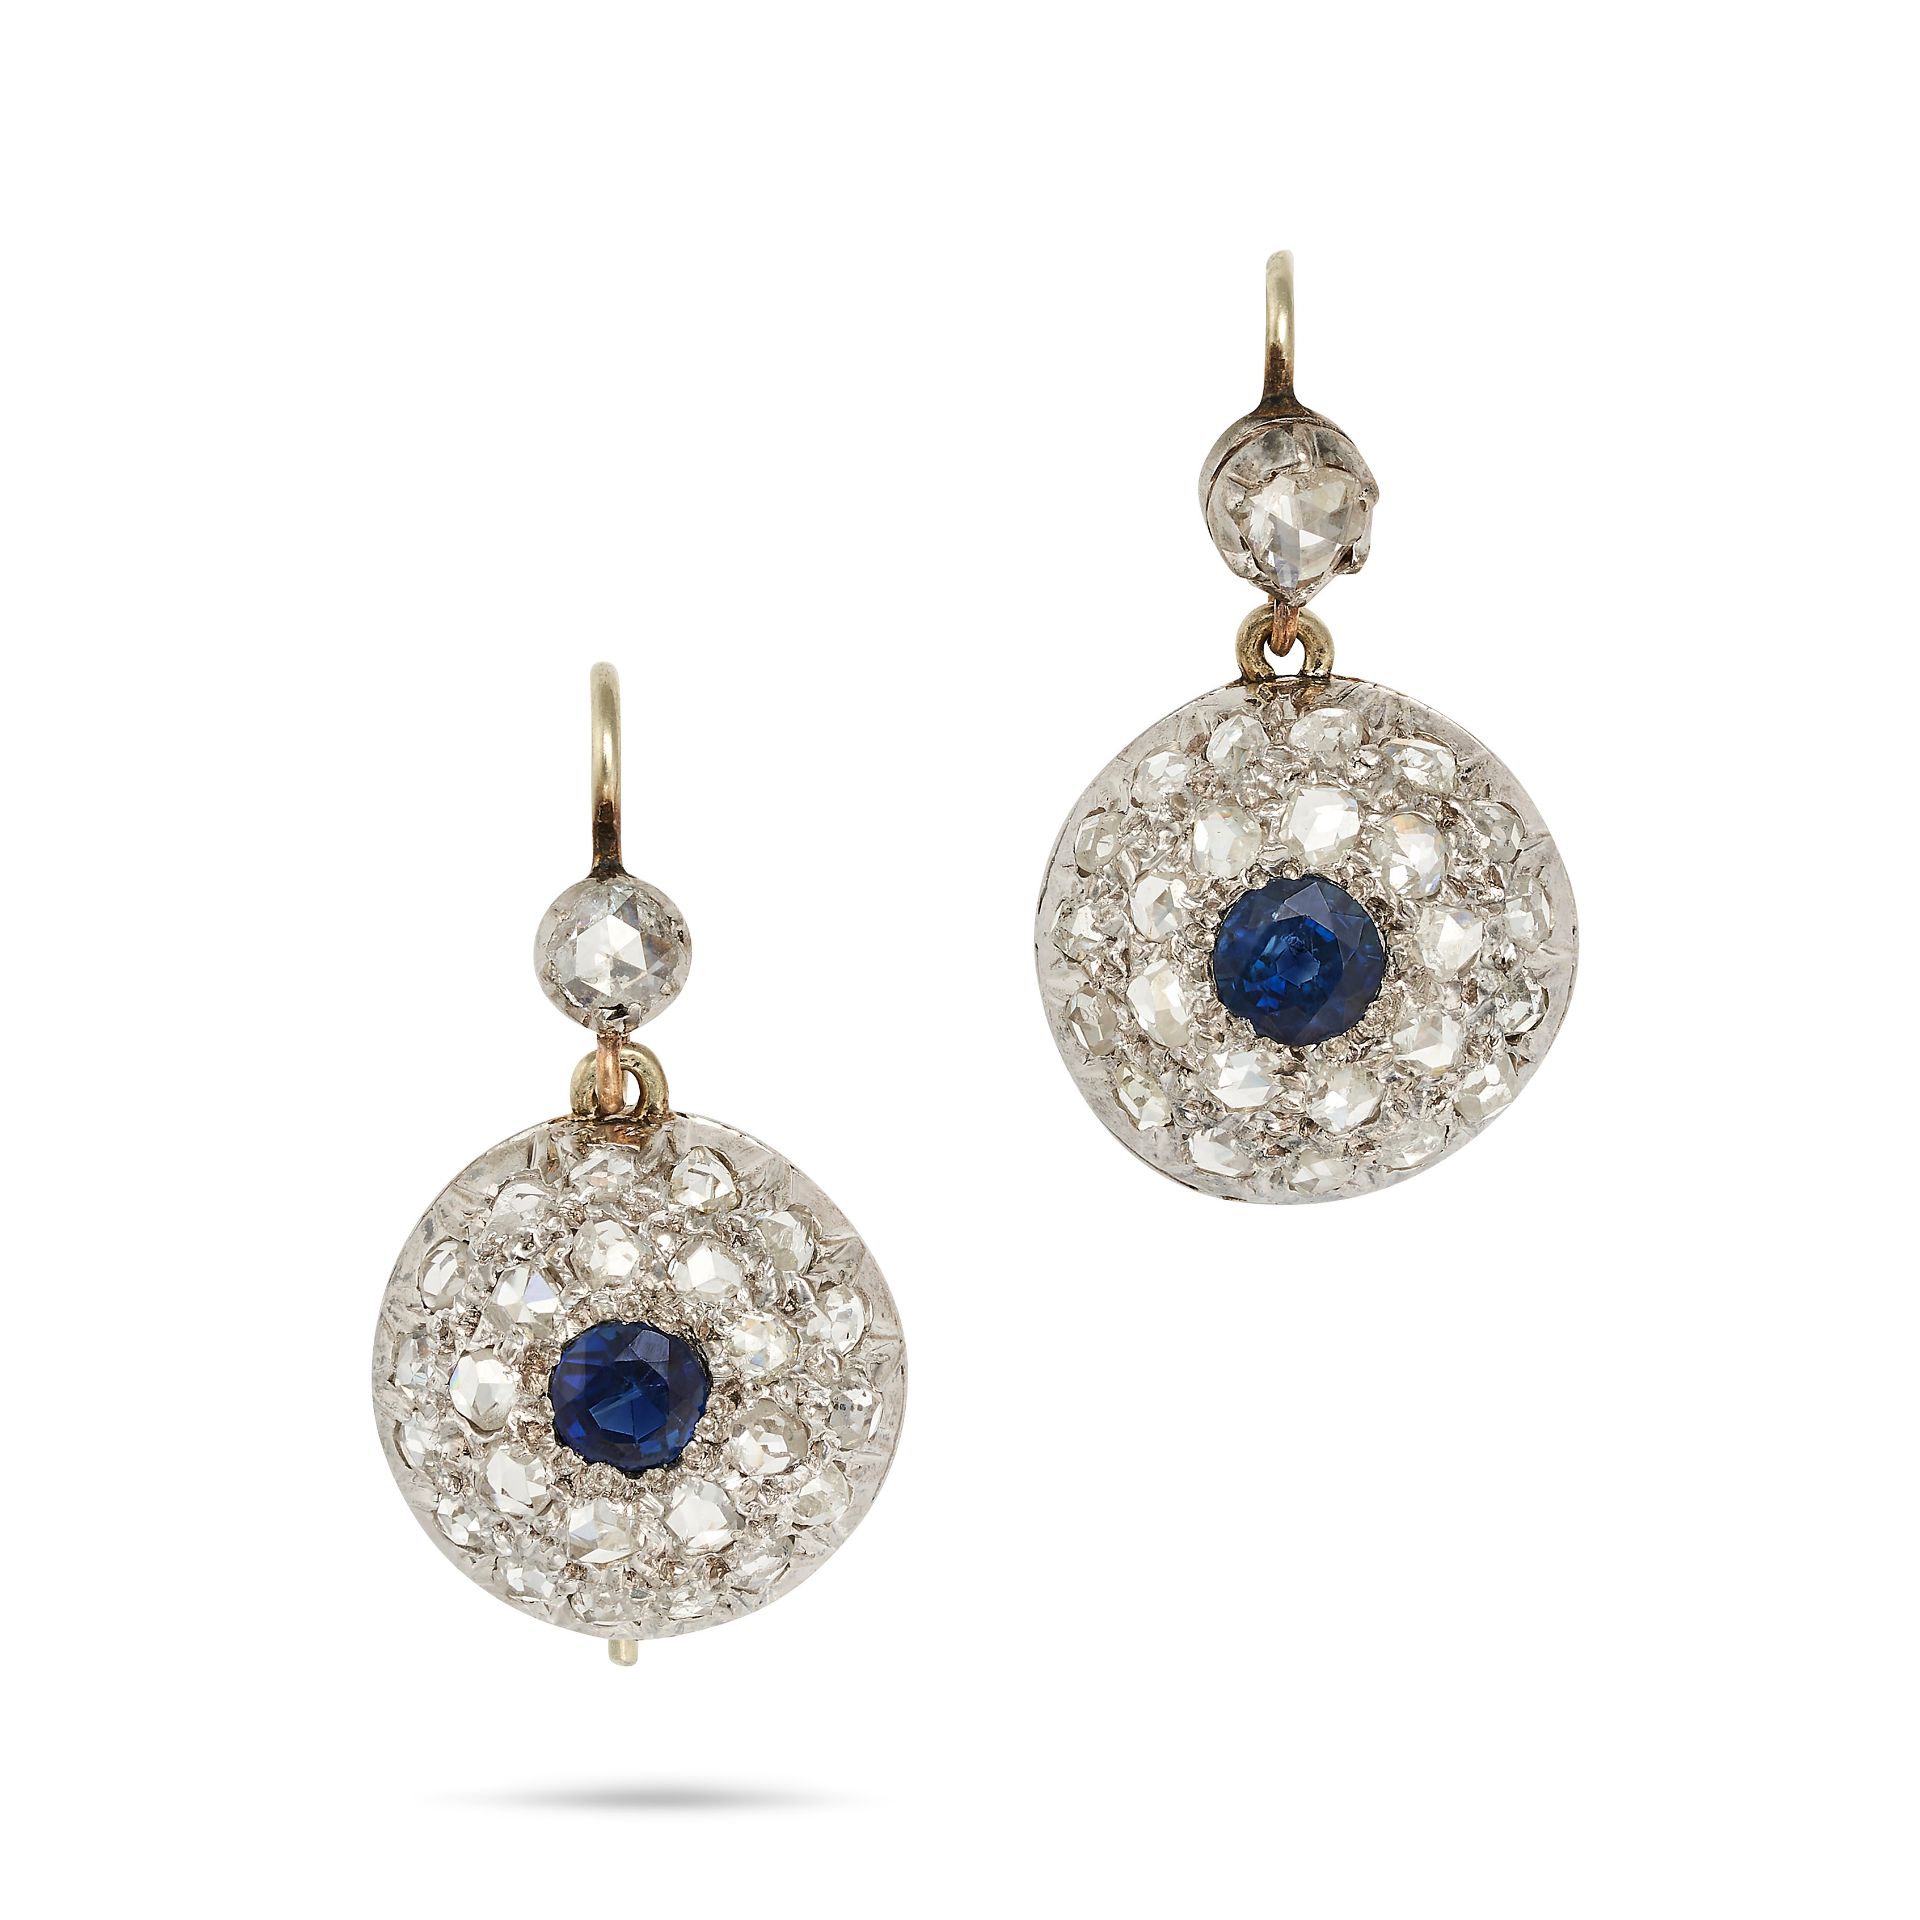 A PAIR OF SAPPHIRE AND DIAMOND EARRINGS in white gold, each comprising a rose cut diamond suspend...